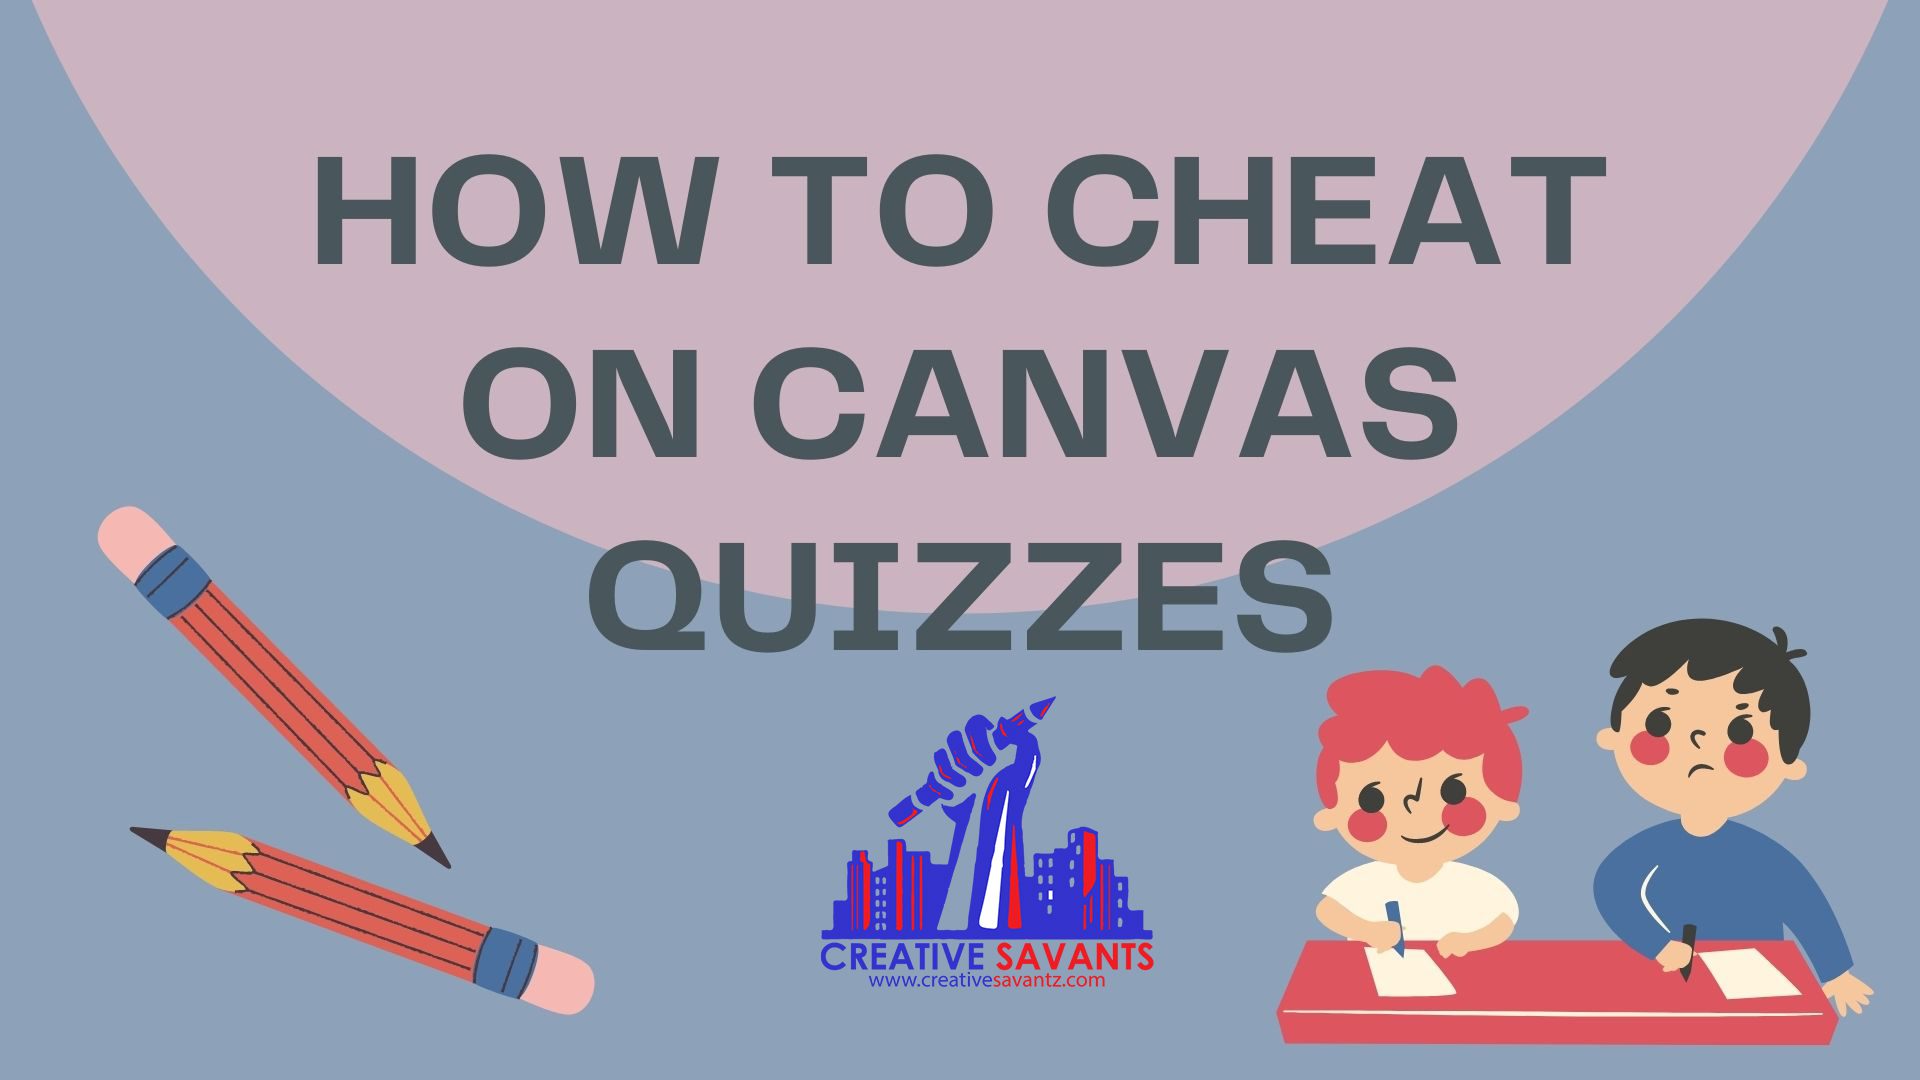 Can Canvas detect cheating